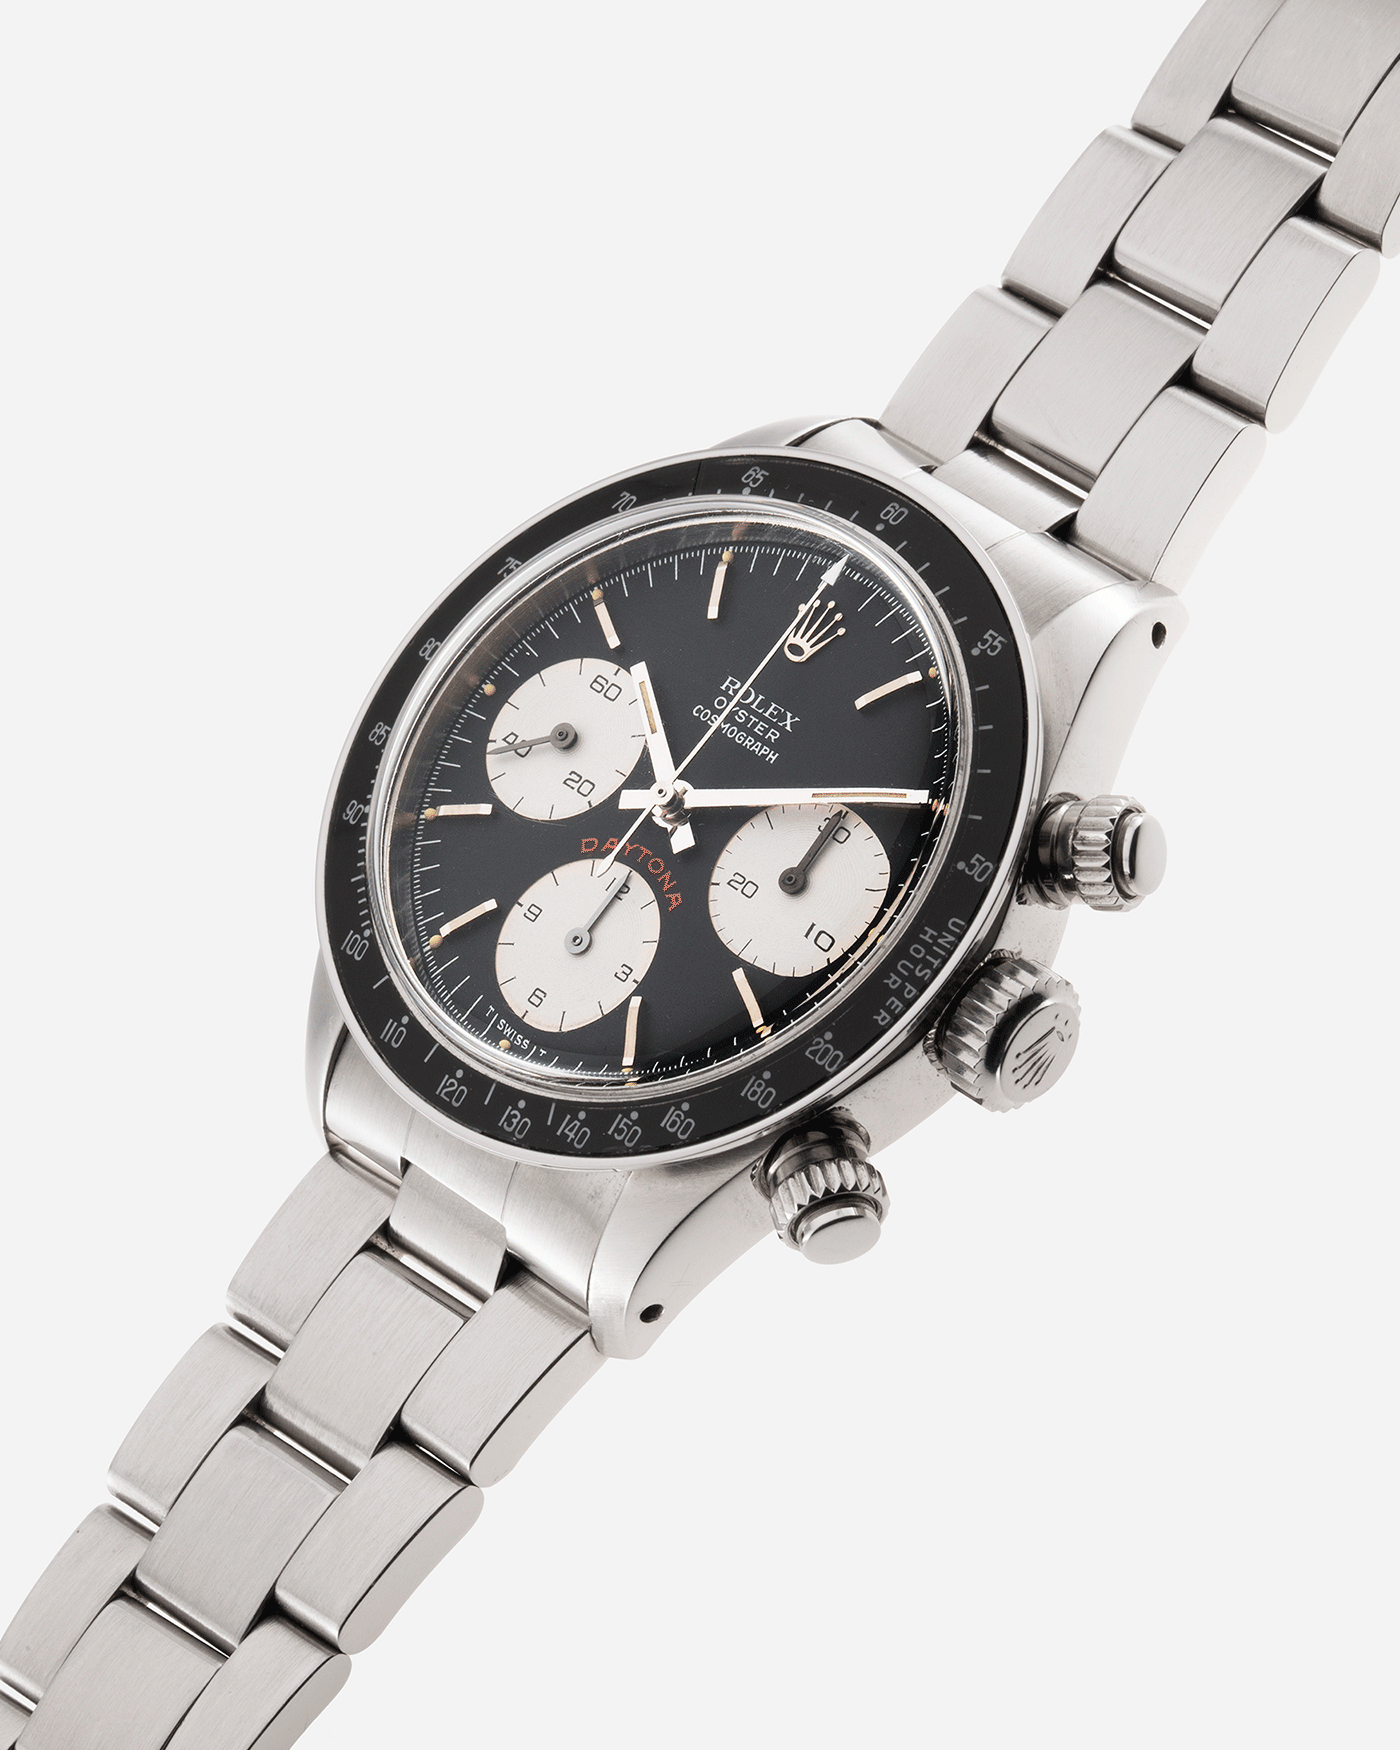 Brand: Rolex Year: 1979 Model: Cosmograph Daytona Reference Number: 6263 Serial Number: 5,8XX,XXX Material: Stainless Steel Movement: Valjoux 727 Case Diameter: 36mm Strap: Rolex 78350 Oyster Bracelet with 571 Endlinks